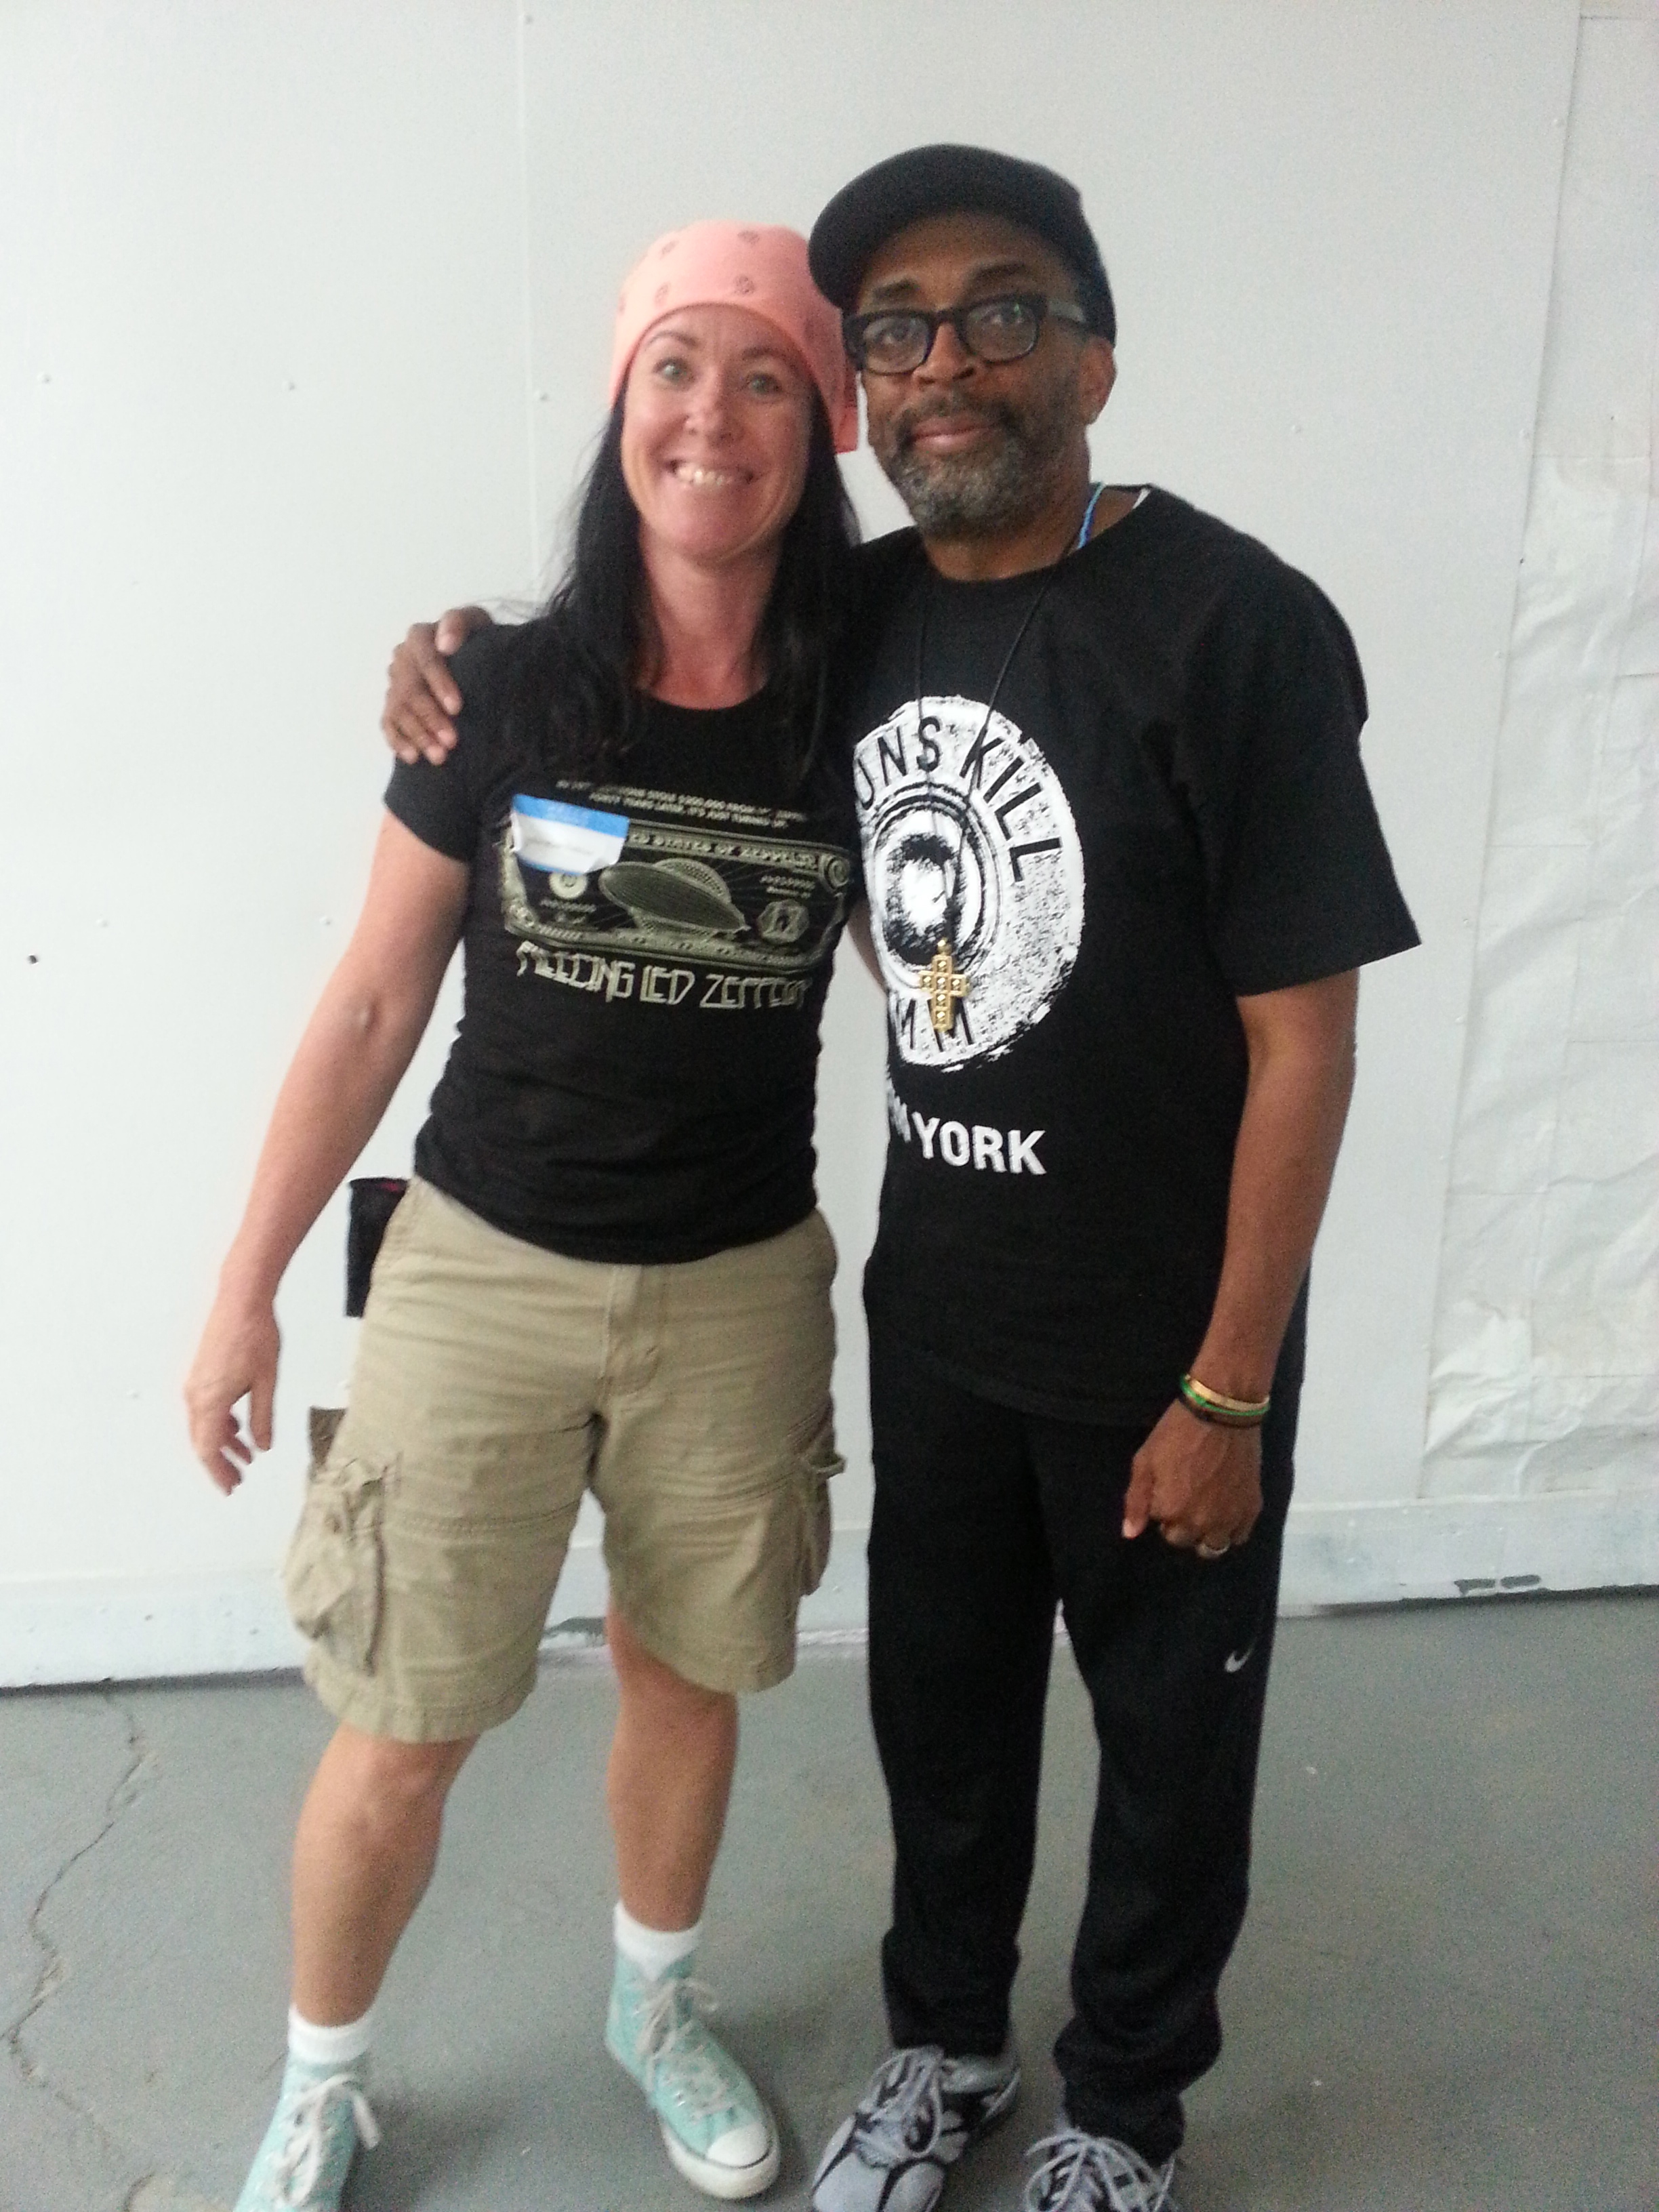 With Spike Lee at 40 Acres & A Mule, Brooklyn, NYC. 2013